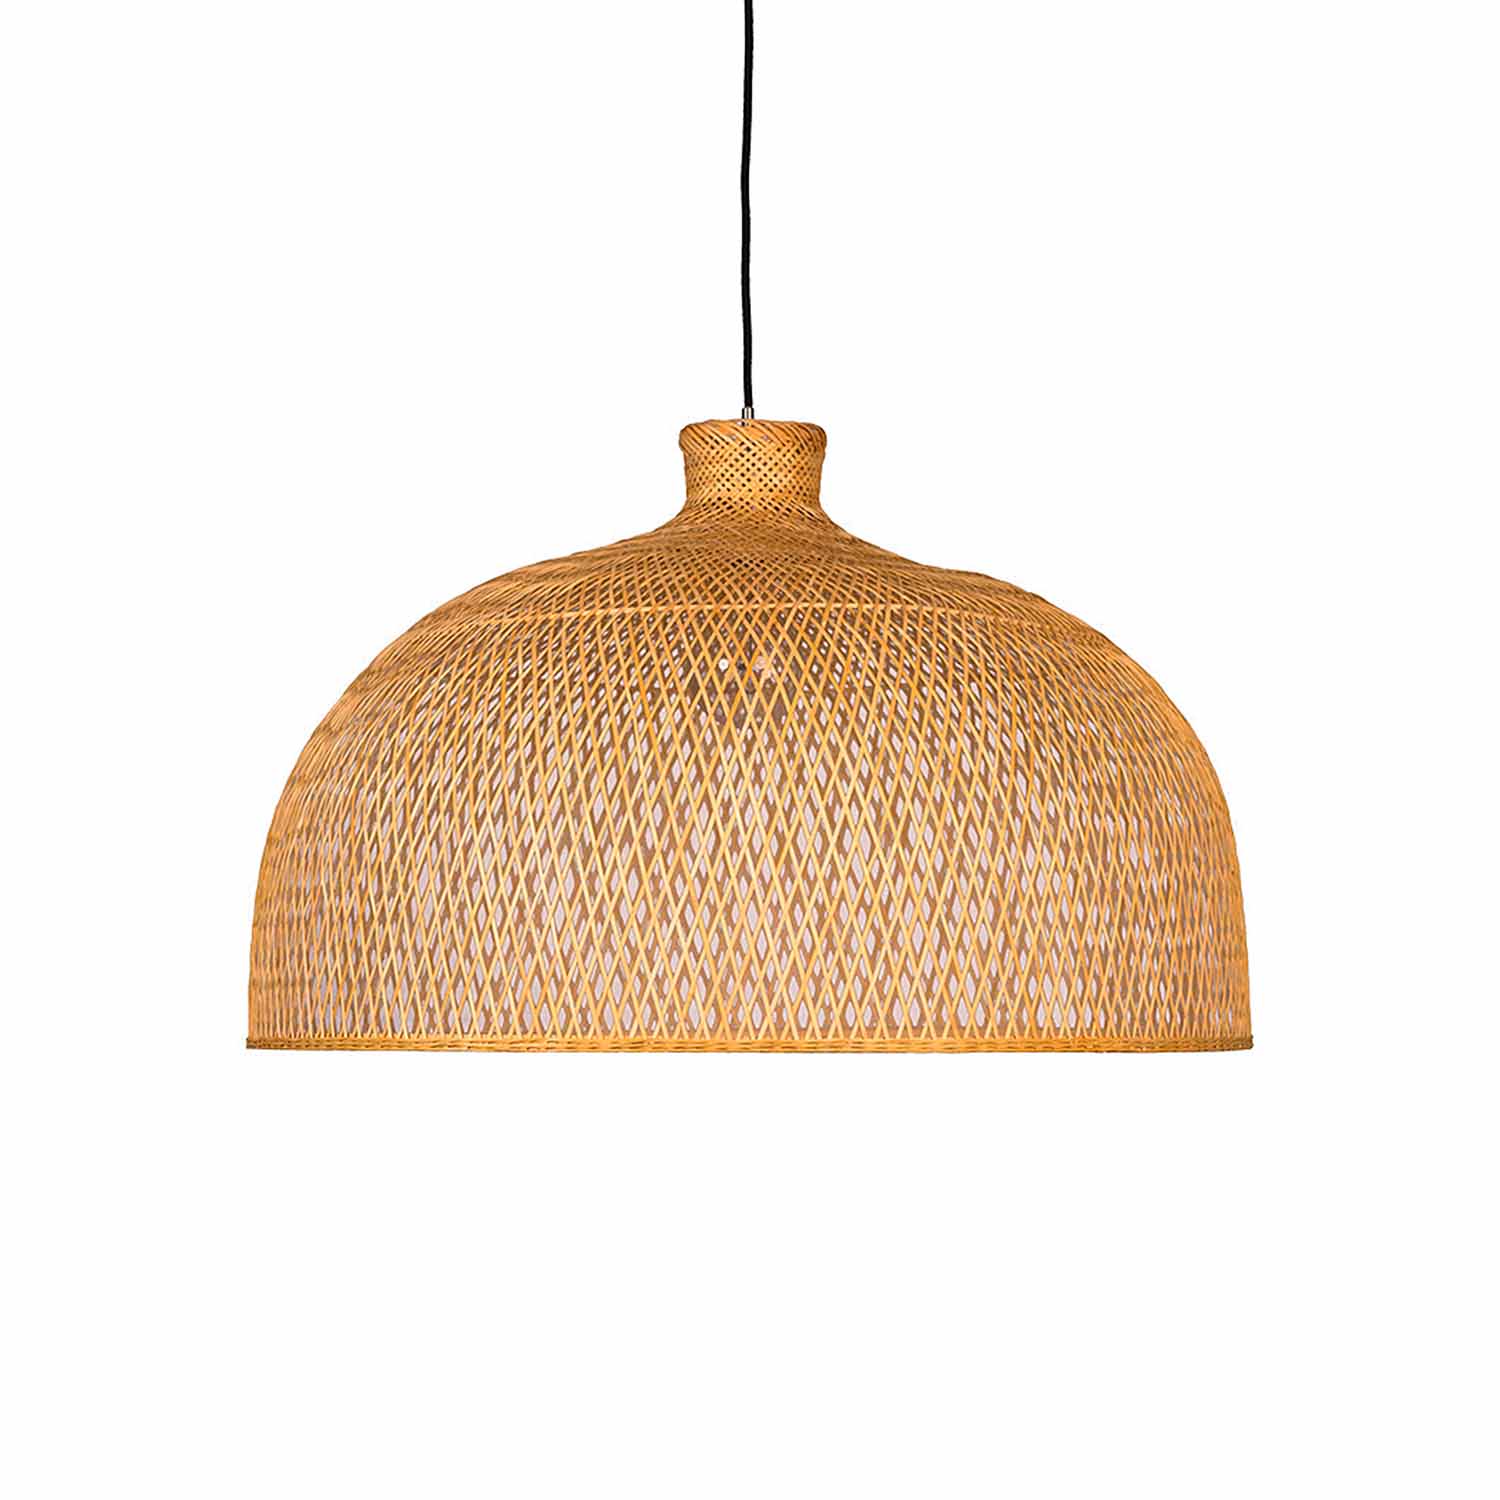 M1 - Handcrafted pendant light in exotic style woven bamboo